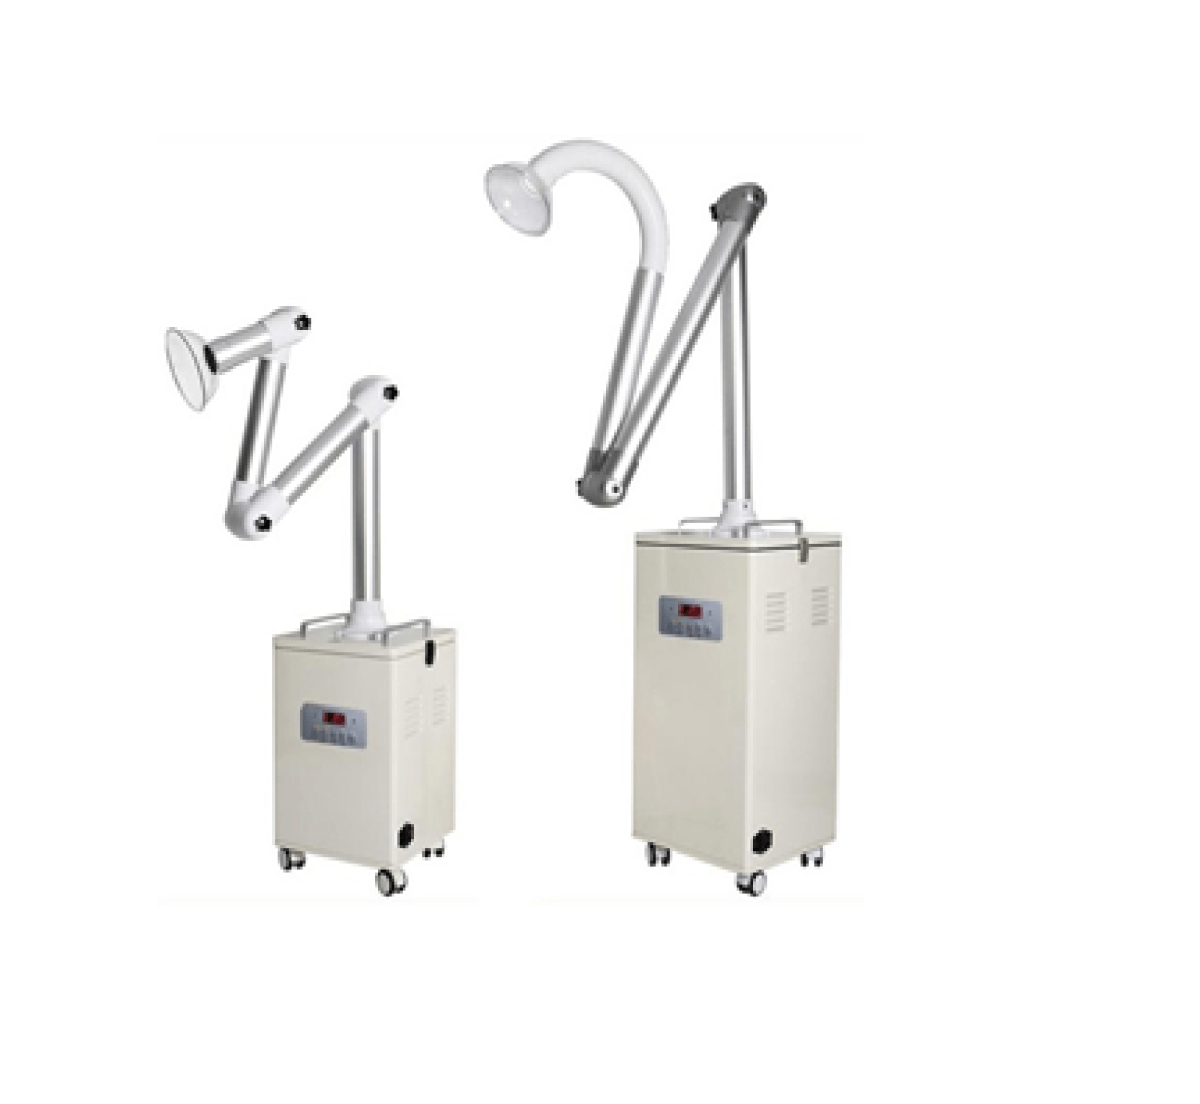 B4 This Product Is A Mobile Extra-Oral Dental Suction Machine, Which Quickly Filters Aerosol Spray, Bacteria, And Other Harmful Substances During Treatment By Utilizing The High Negative Pressure Produced By A 500W Brushless Direct Current Motor. Replacement Filters Are Available In Stock Upon Request. &Lt;Pre&Gt;Free Delivery And Setup All Over The Uae&Lt;/Pre&Gt; Pureair 2 - Extraoral Suction Machine (500W)